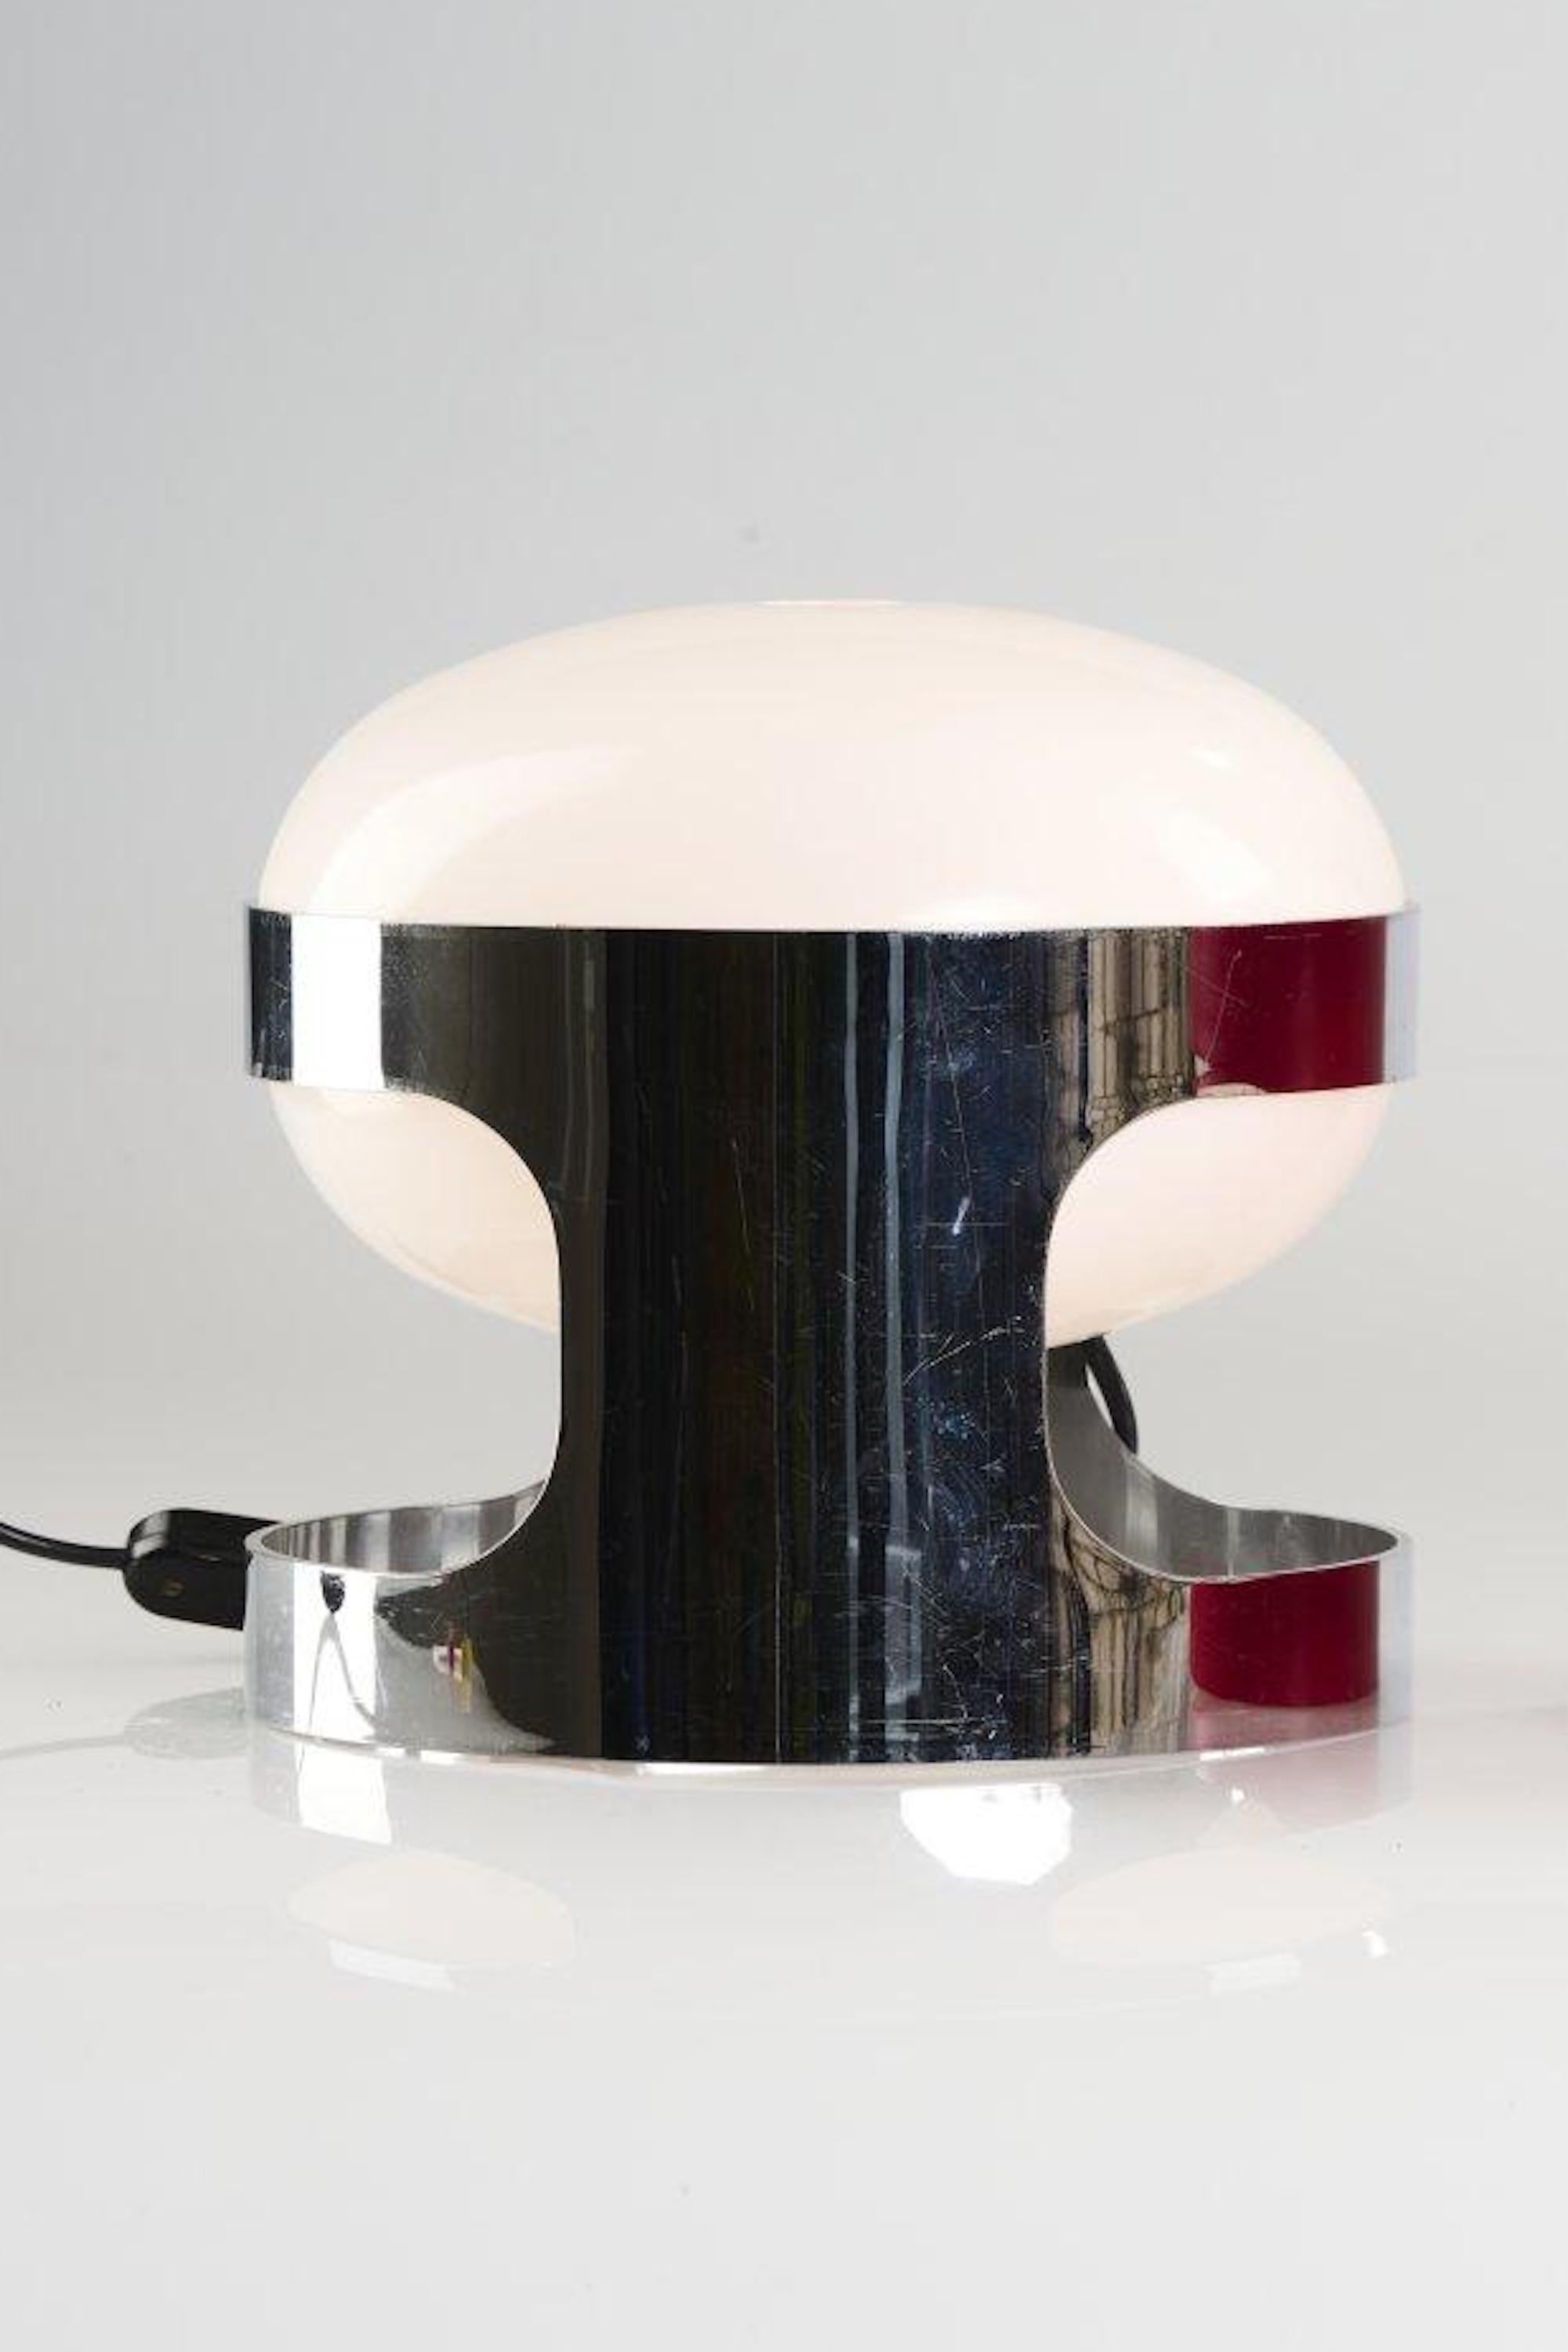 'KD 27' table Lamp was designed by Joe Colombo in 1967.

H. 23 cm, Ø 25 cm.

Made by Kartell, Noviglio.

Plastic, white, chrome-plated.

Ref. Gramigna, Repertorio 1950 - 1980, Milan 2001, p. 262.

Good condition.